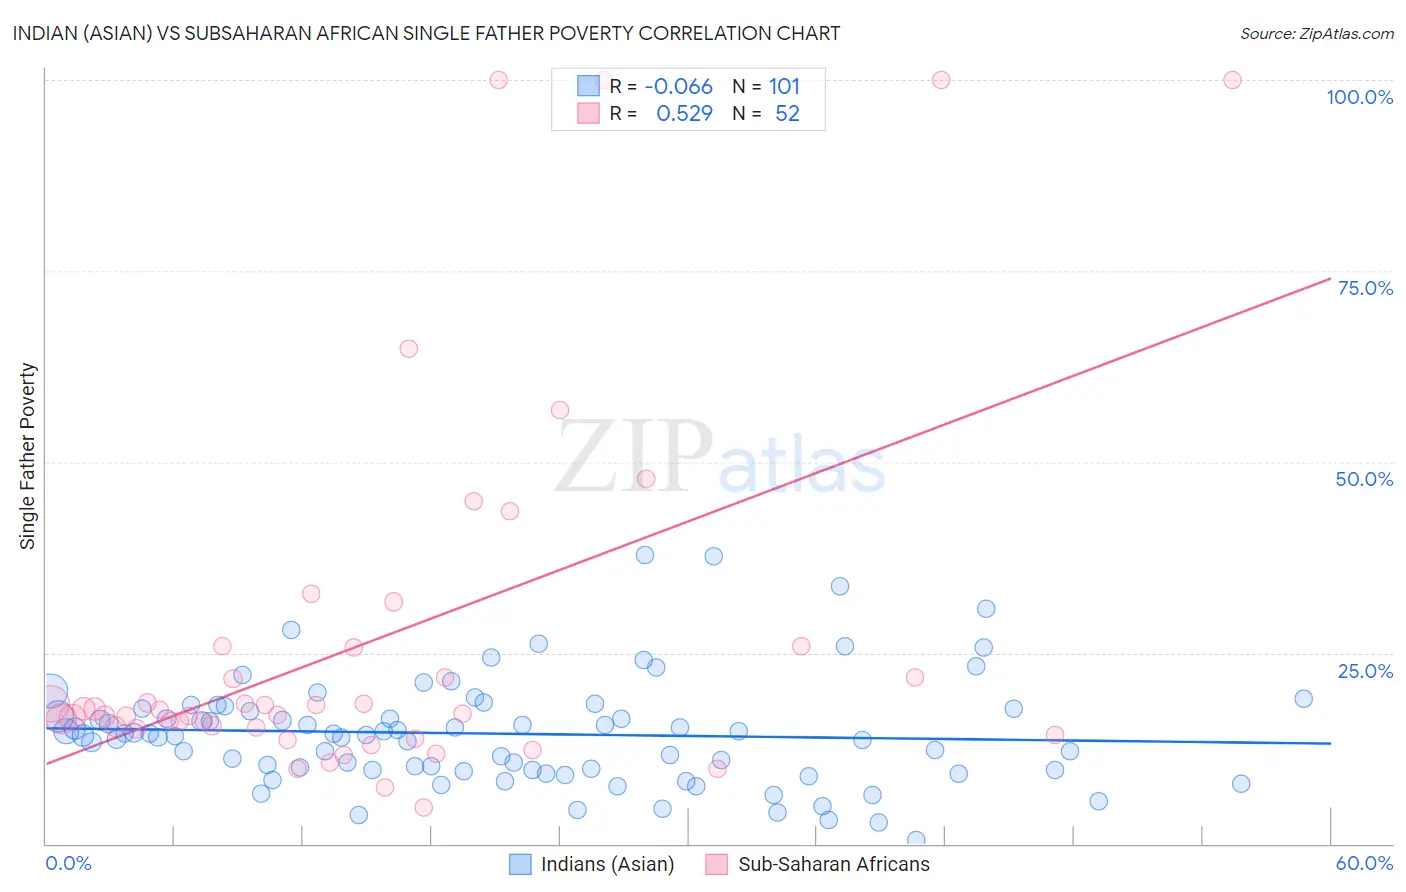 Indian (Asian) vs Subsaharan African Single Father Poverty